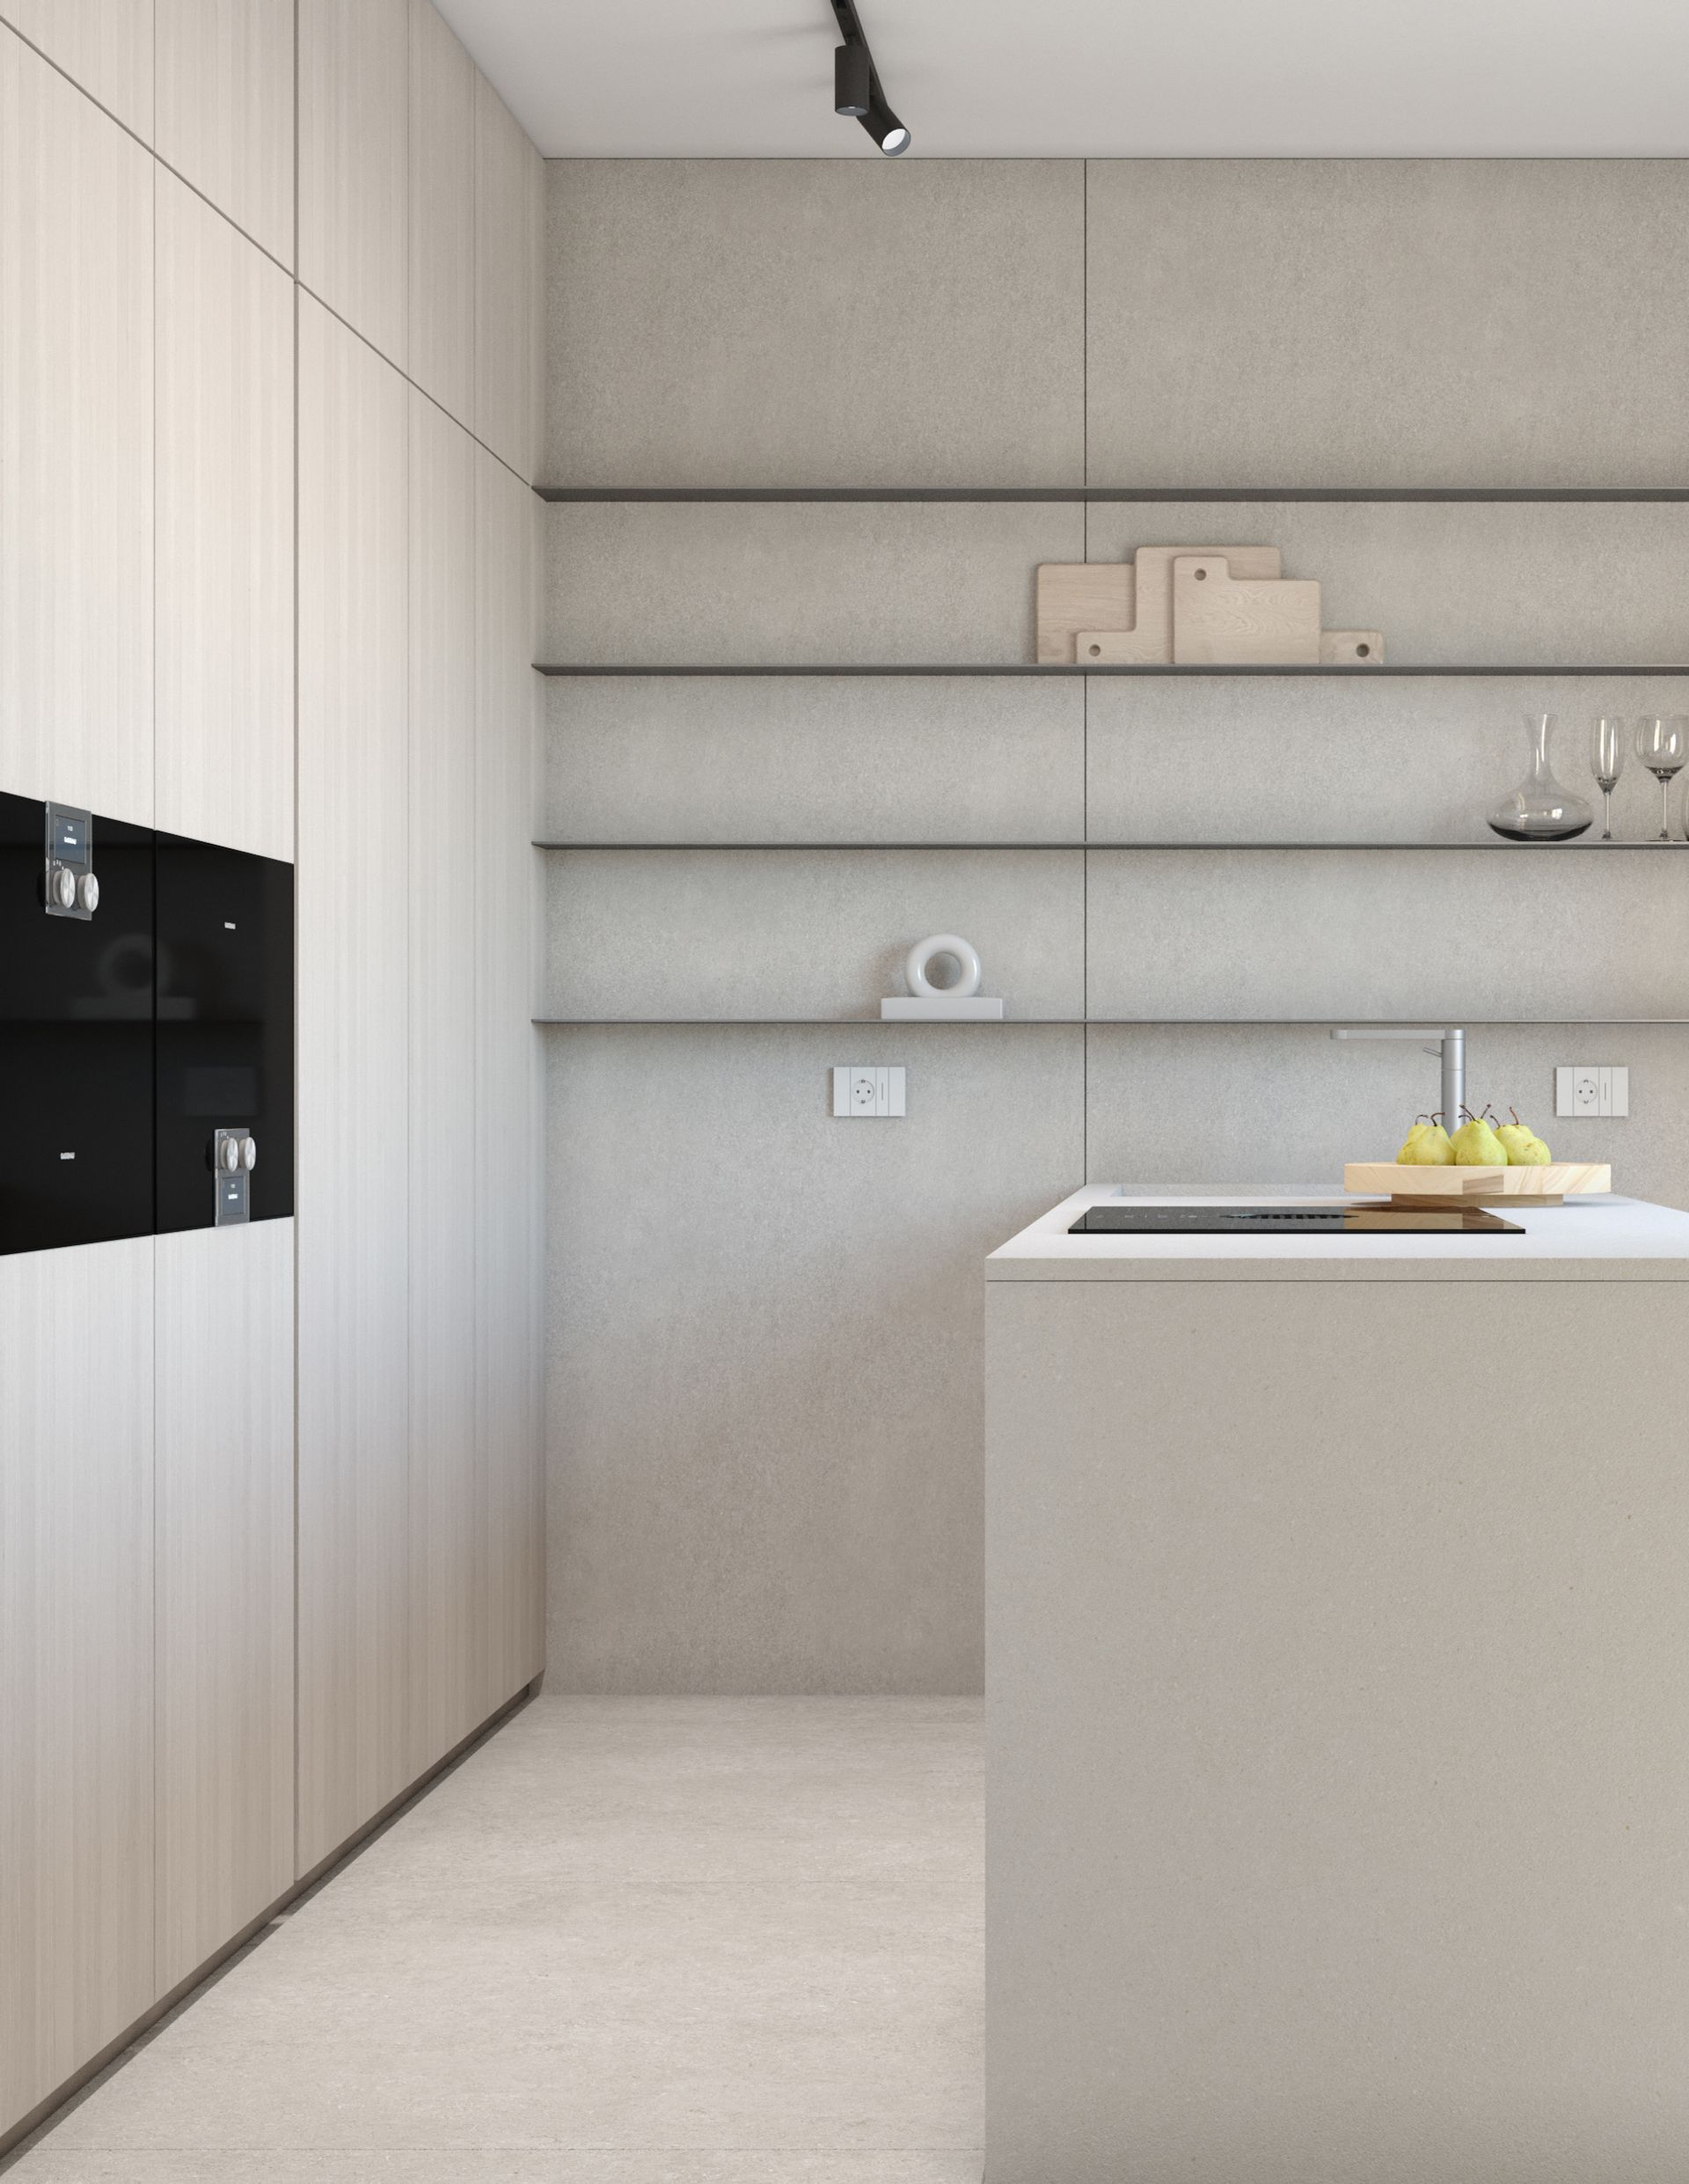 Interior design project, apartment renovation, study of spaces and surfaces, island kitchen with wood paneling. Officina Magisafi architecture design -  kitchen shelves rendering